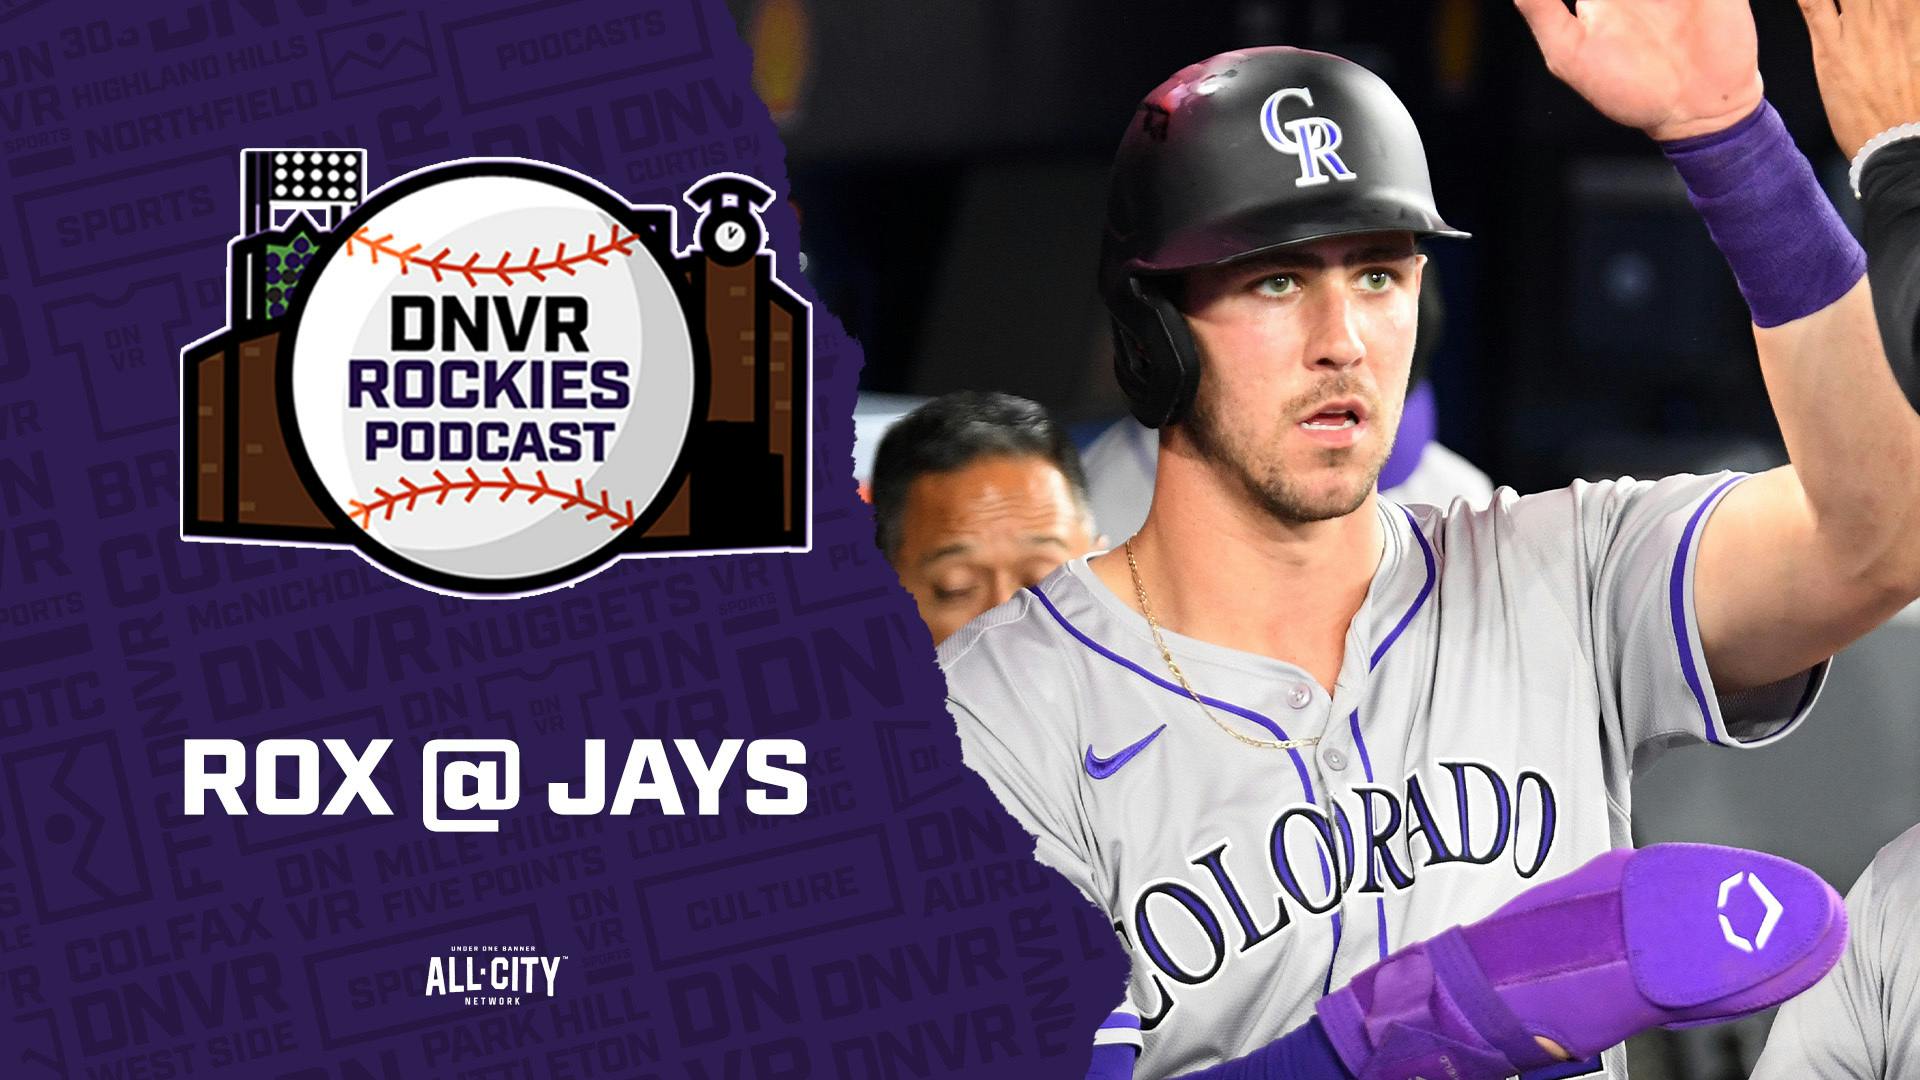 Series Wrap: Rockies lose series in Toronto; Kris Bryant out of lineup with back soreness | DNVR Rockies Podcast